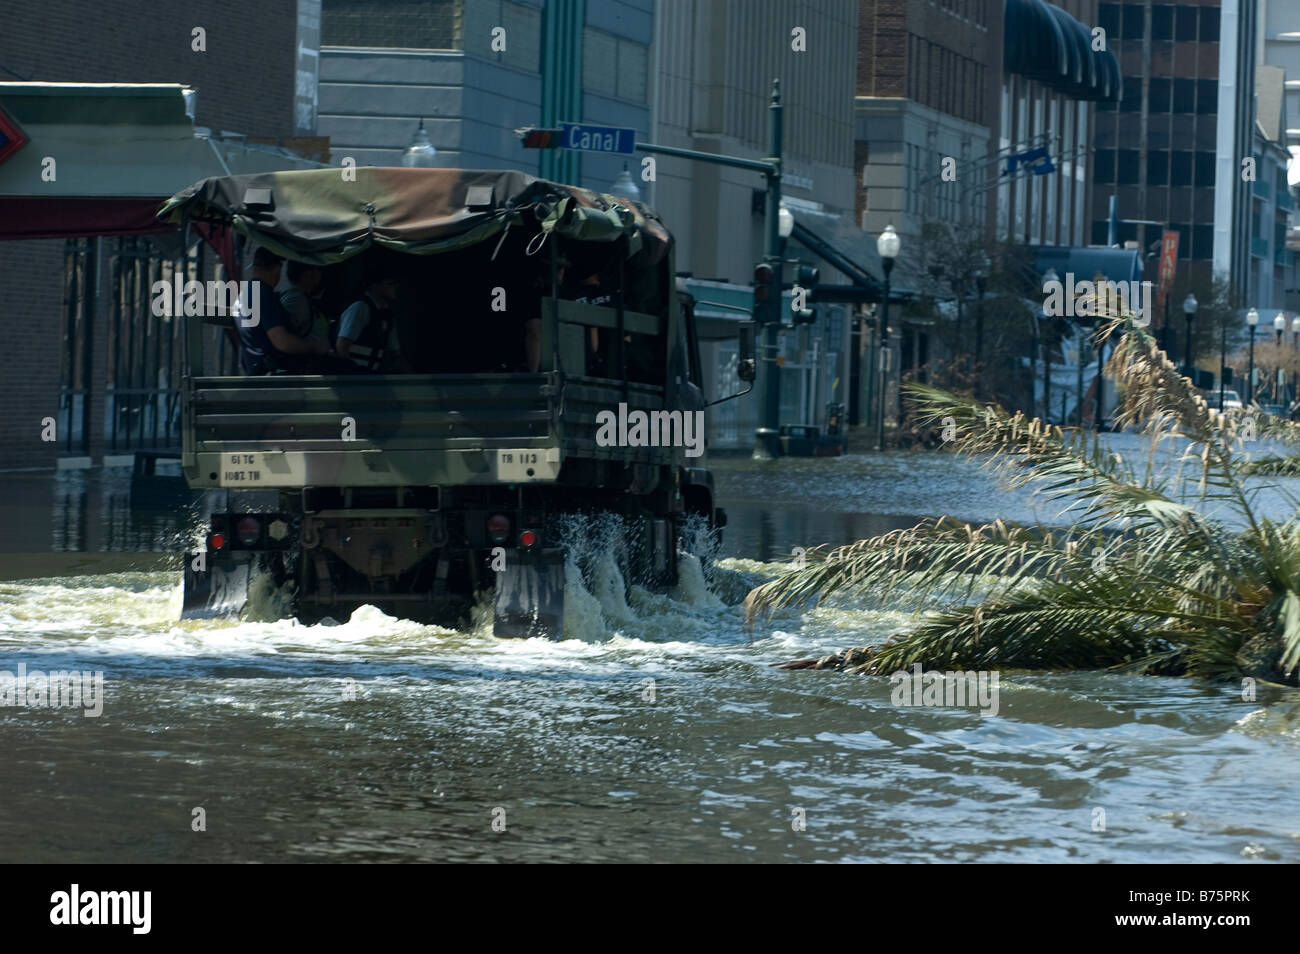 Military vehicle patrolling New Orleans after Hurricane Katrina Stock Photo